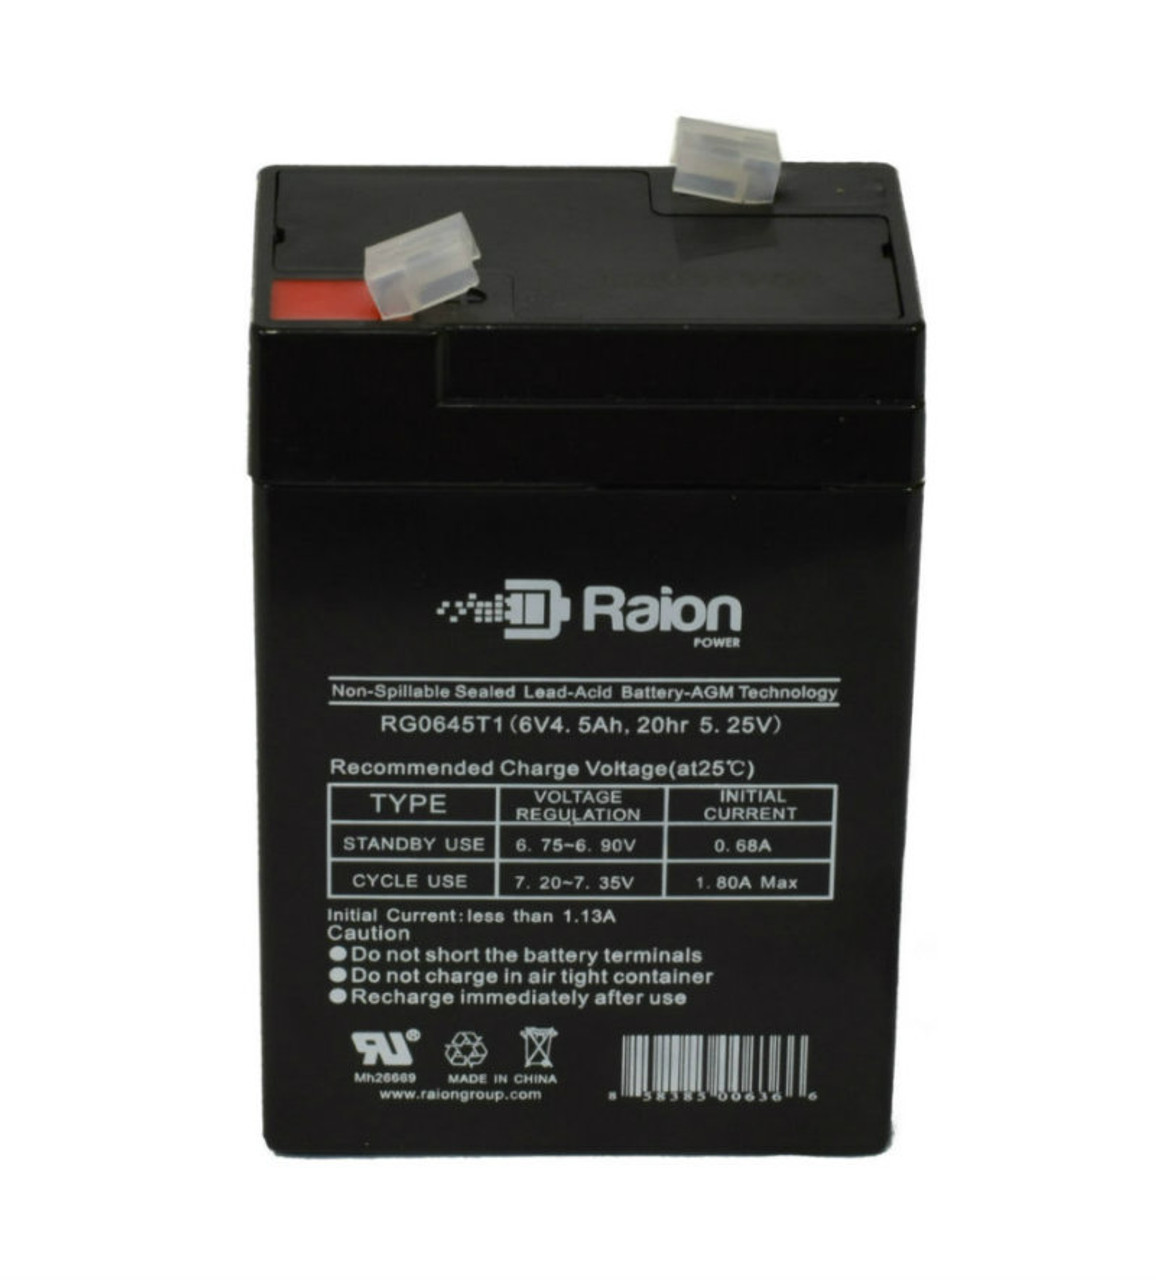 Raion Power RG0645T1 Replacement Battery Cartridge for Sentry Lite 09-985